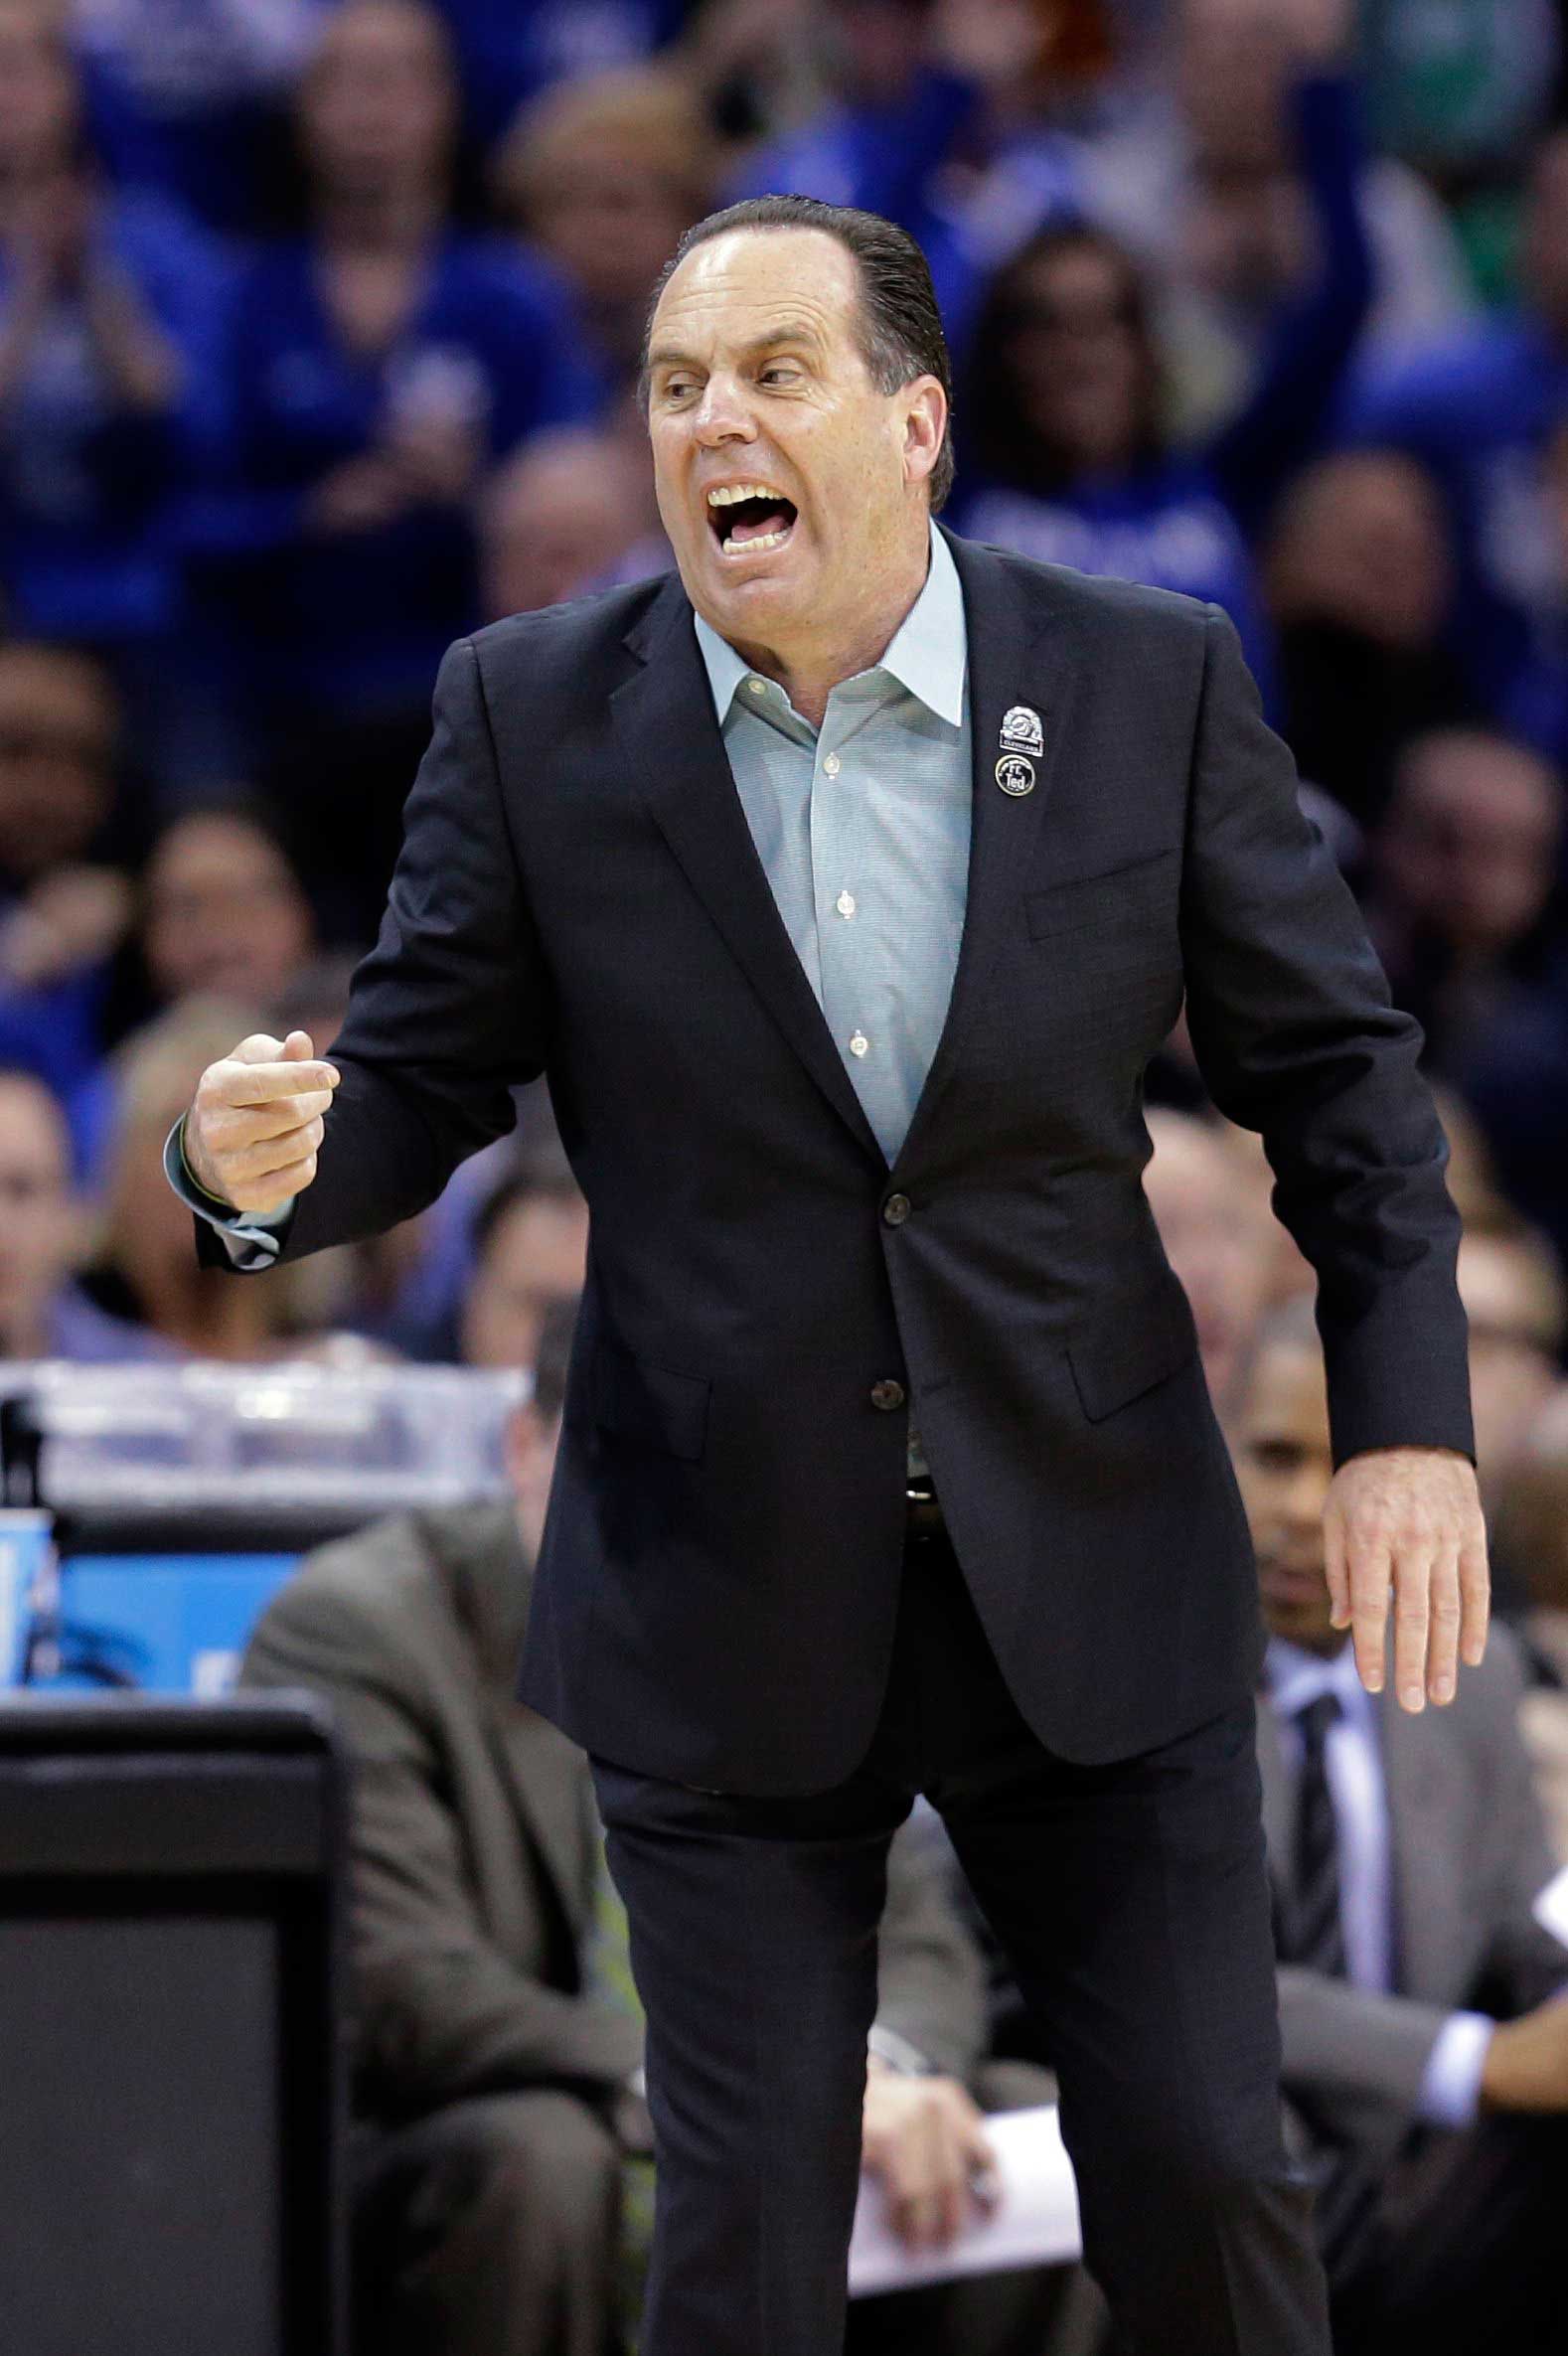 Notre Dame coach Mike Brey yells to his team during the first half of a college basketball game against Kentucky in the NCAA men's tournament regional finals, in Cleveland, March 28, 2015.